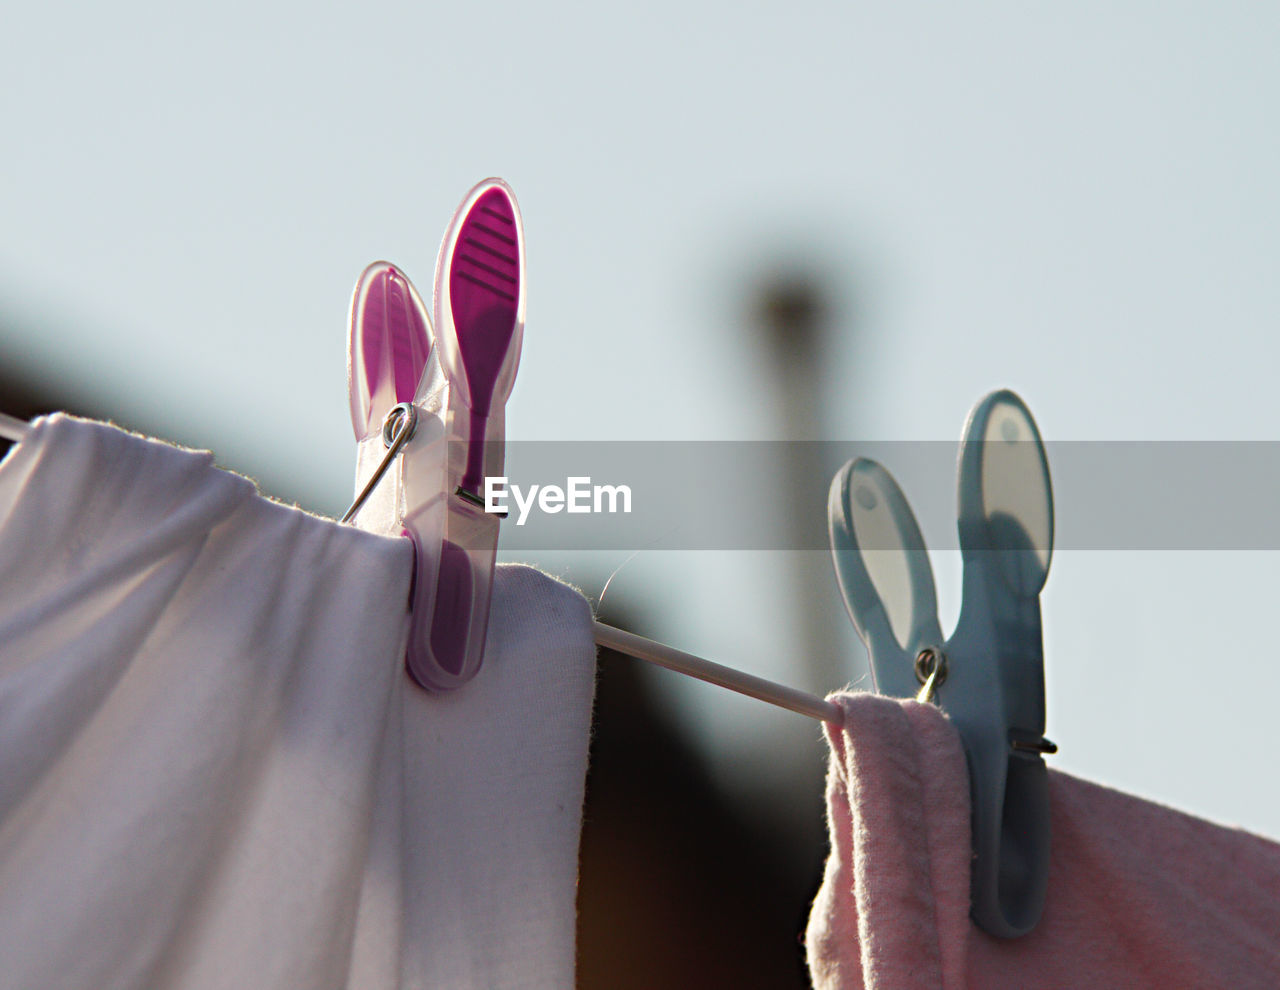 CLOSE-UP OF CLOTHES DRYING ON CLOTHESLINE